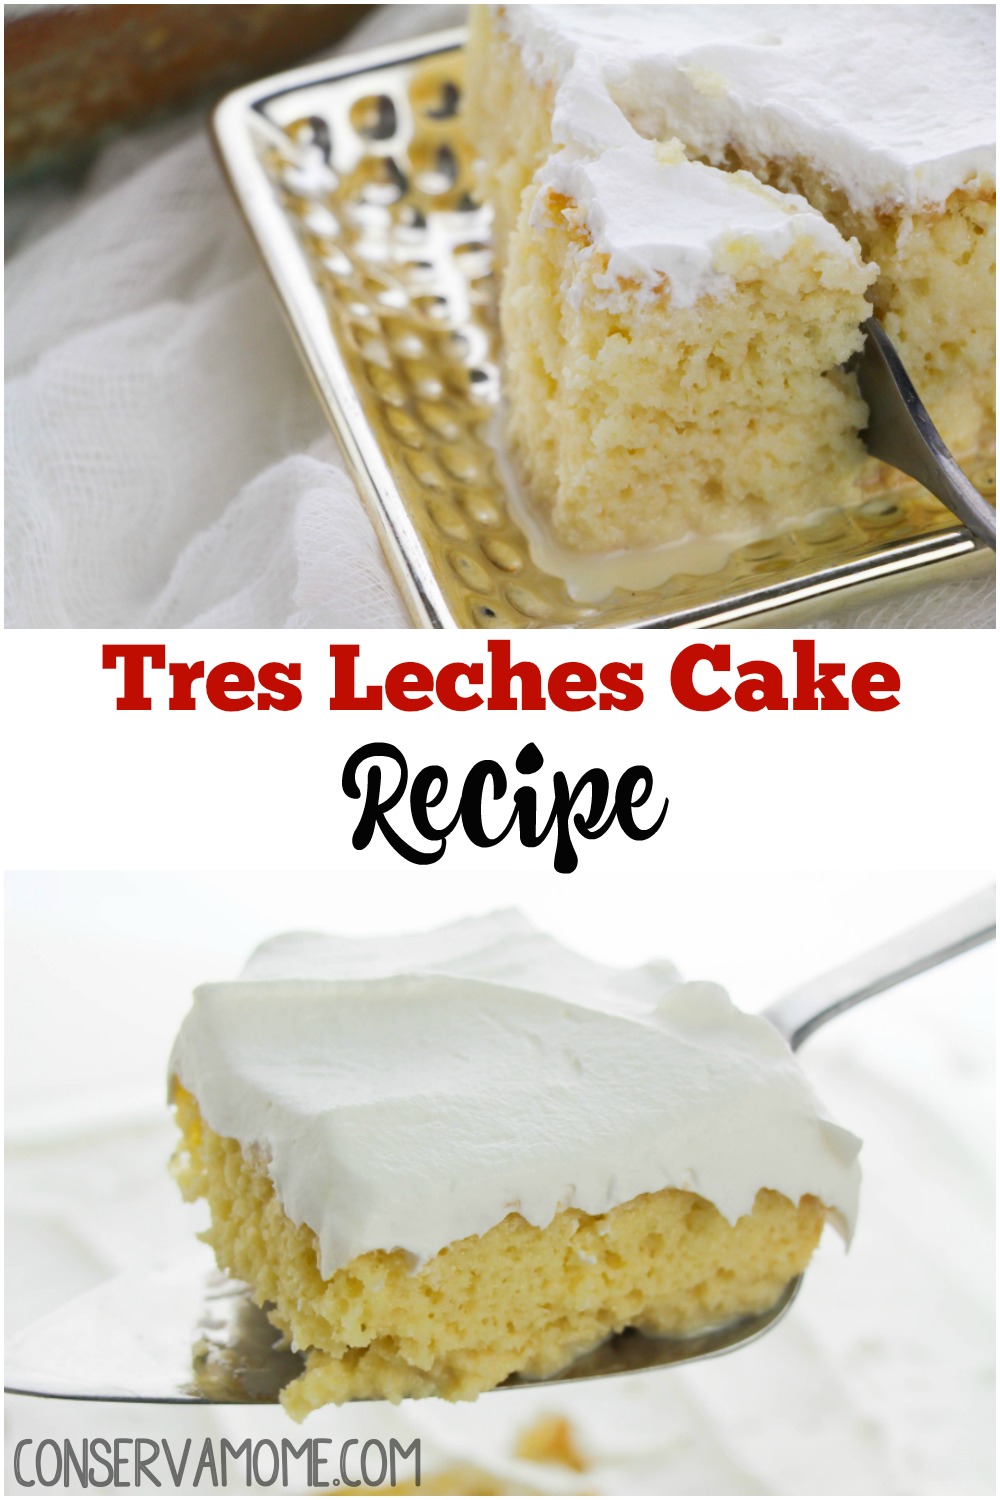 The taste and flavor of this Tres Leches Cake will make you want to skip dinner and just head straight into dessert. This delicious latin dessert recipe will become a favorite in your home.  Not only is it rich and wonderful, but it's dense and moist as well. It's one dessert recipe that you just might break the rules for. 